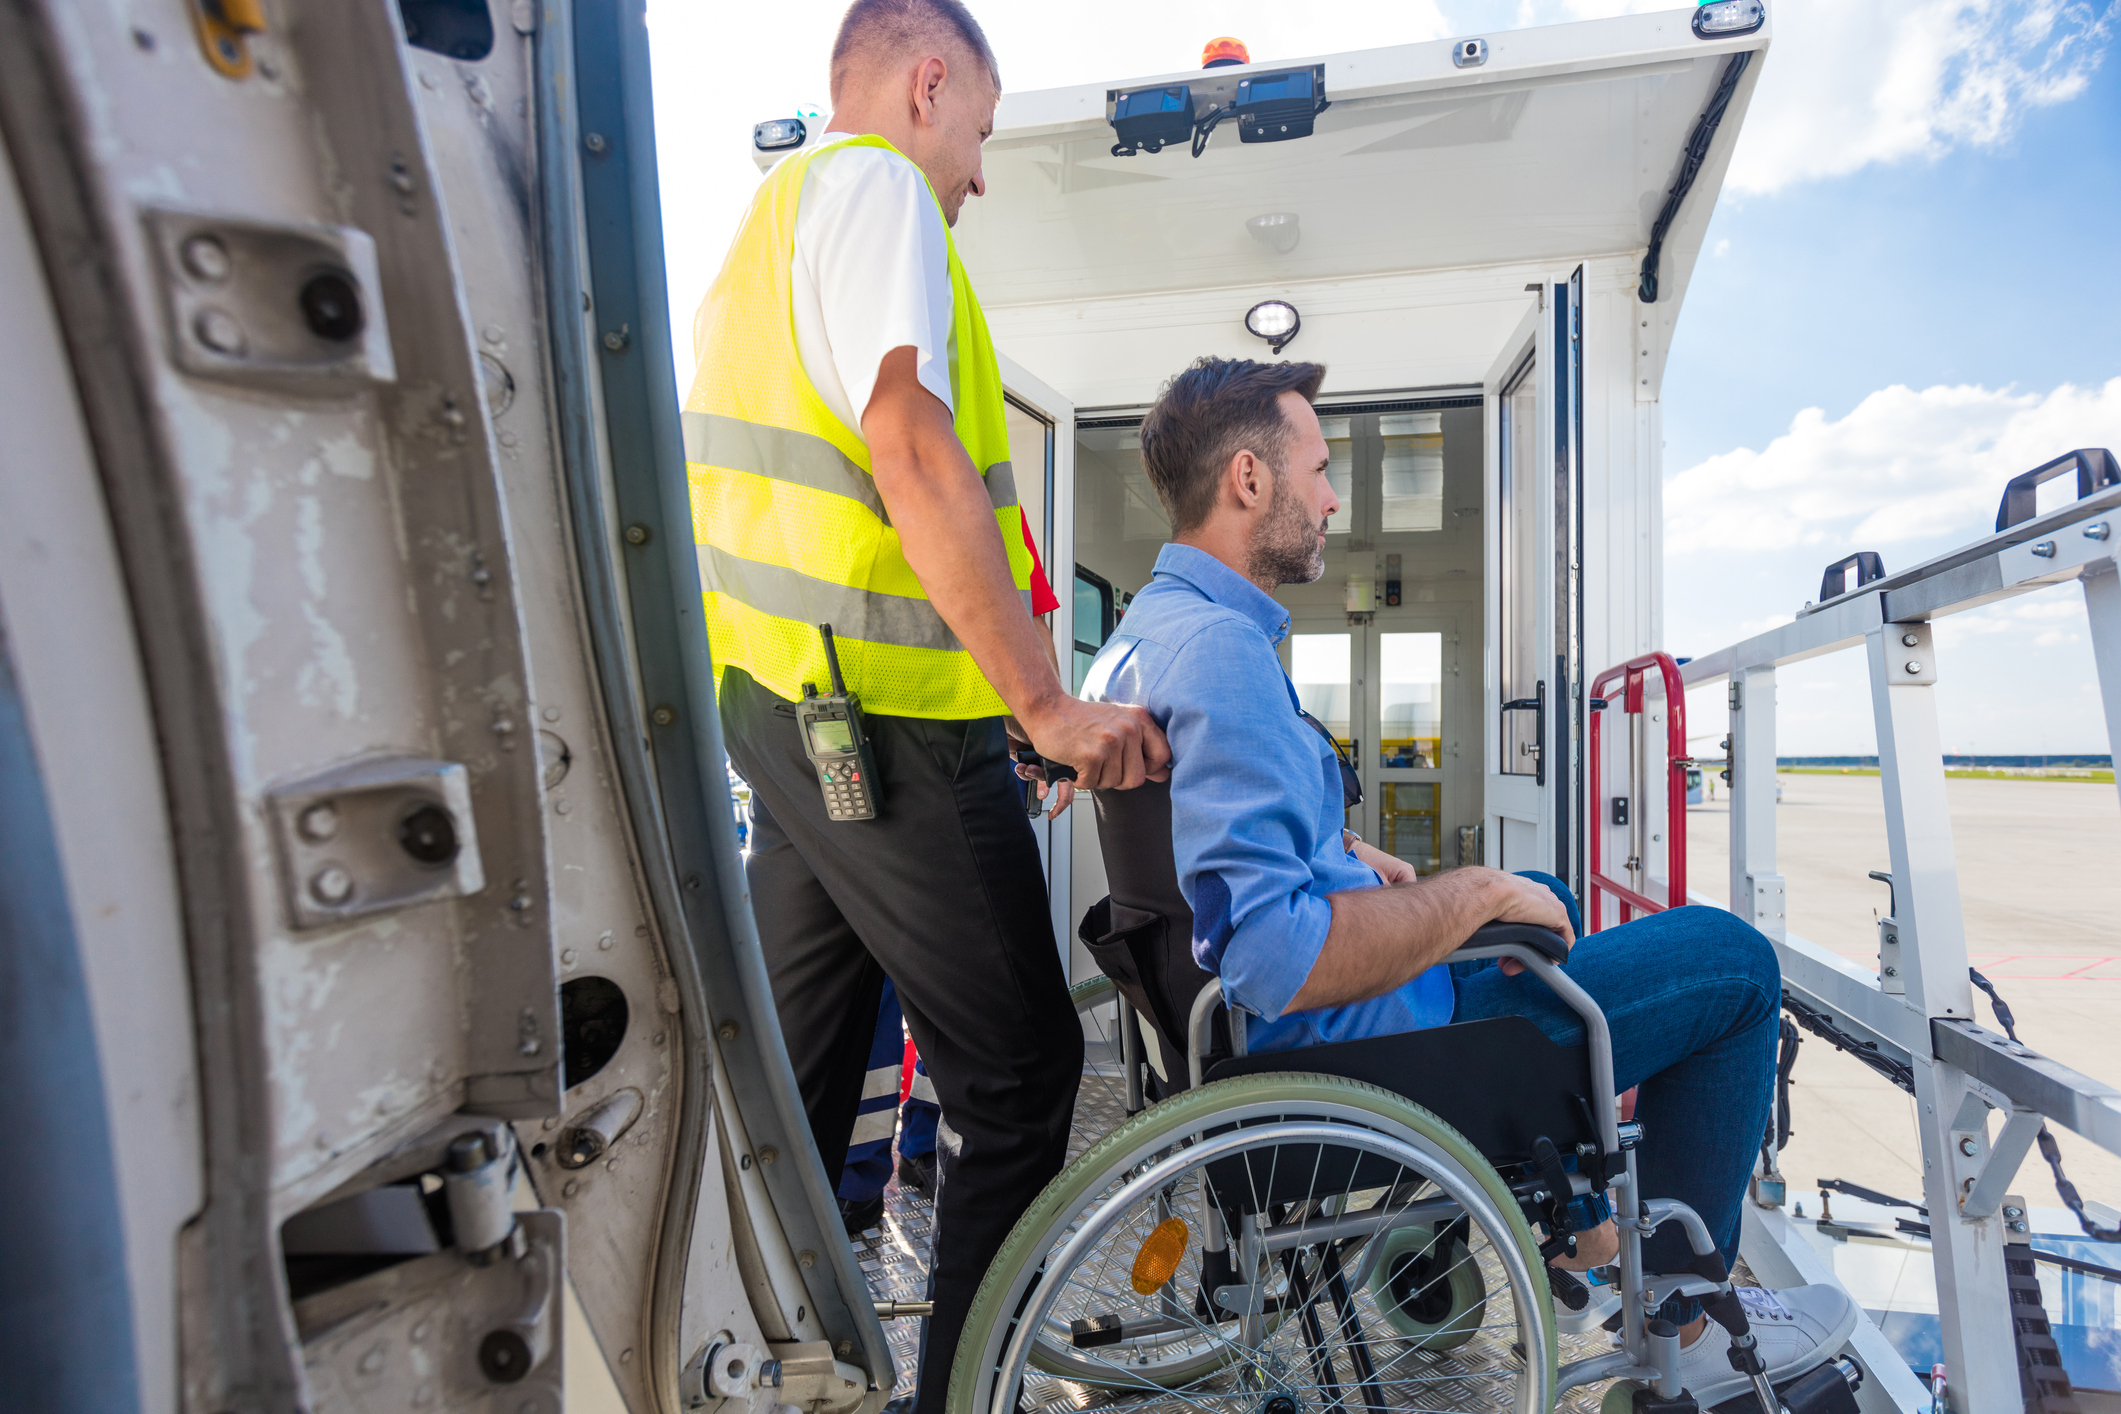 A man in a wheelchair is being pushed by an airline employee; the aircraft door can be seen in the foreground and the gangway in the background.